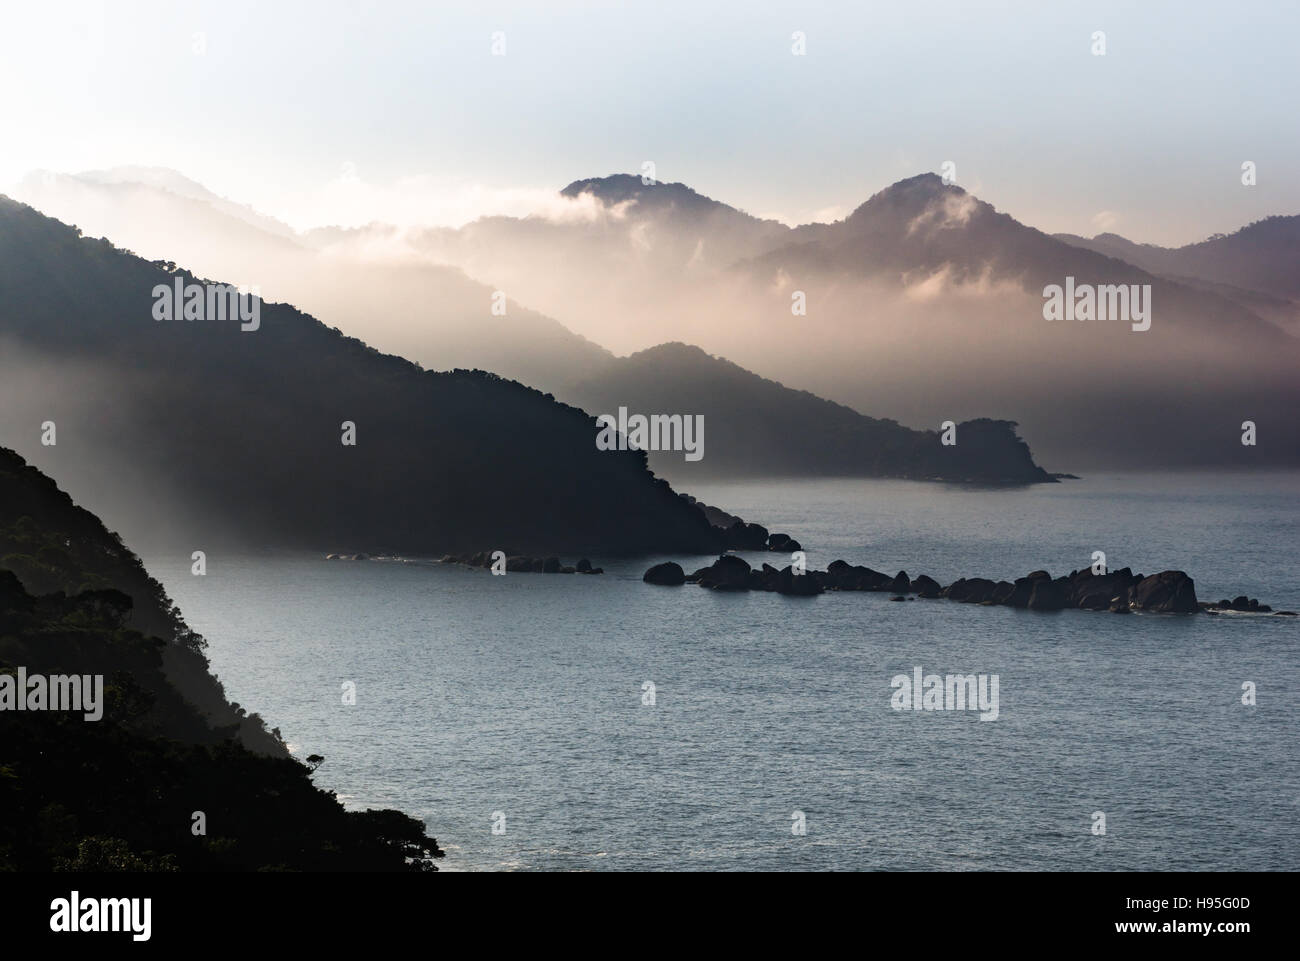 Coastline view of the northern shores of the island of Ilhabela, off the SE coast of Brazil Stock Photo